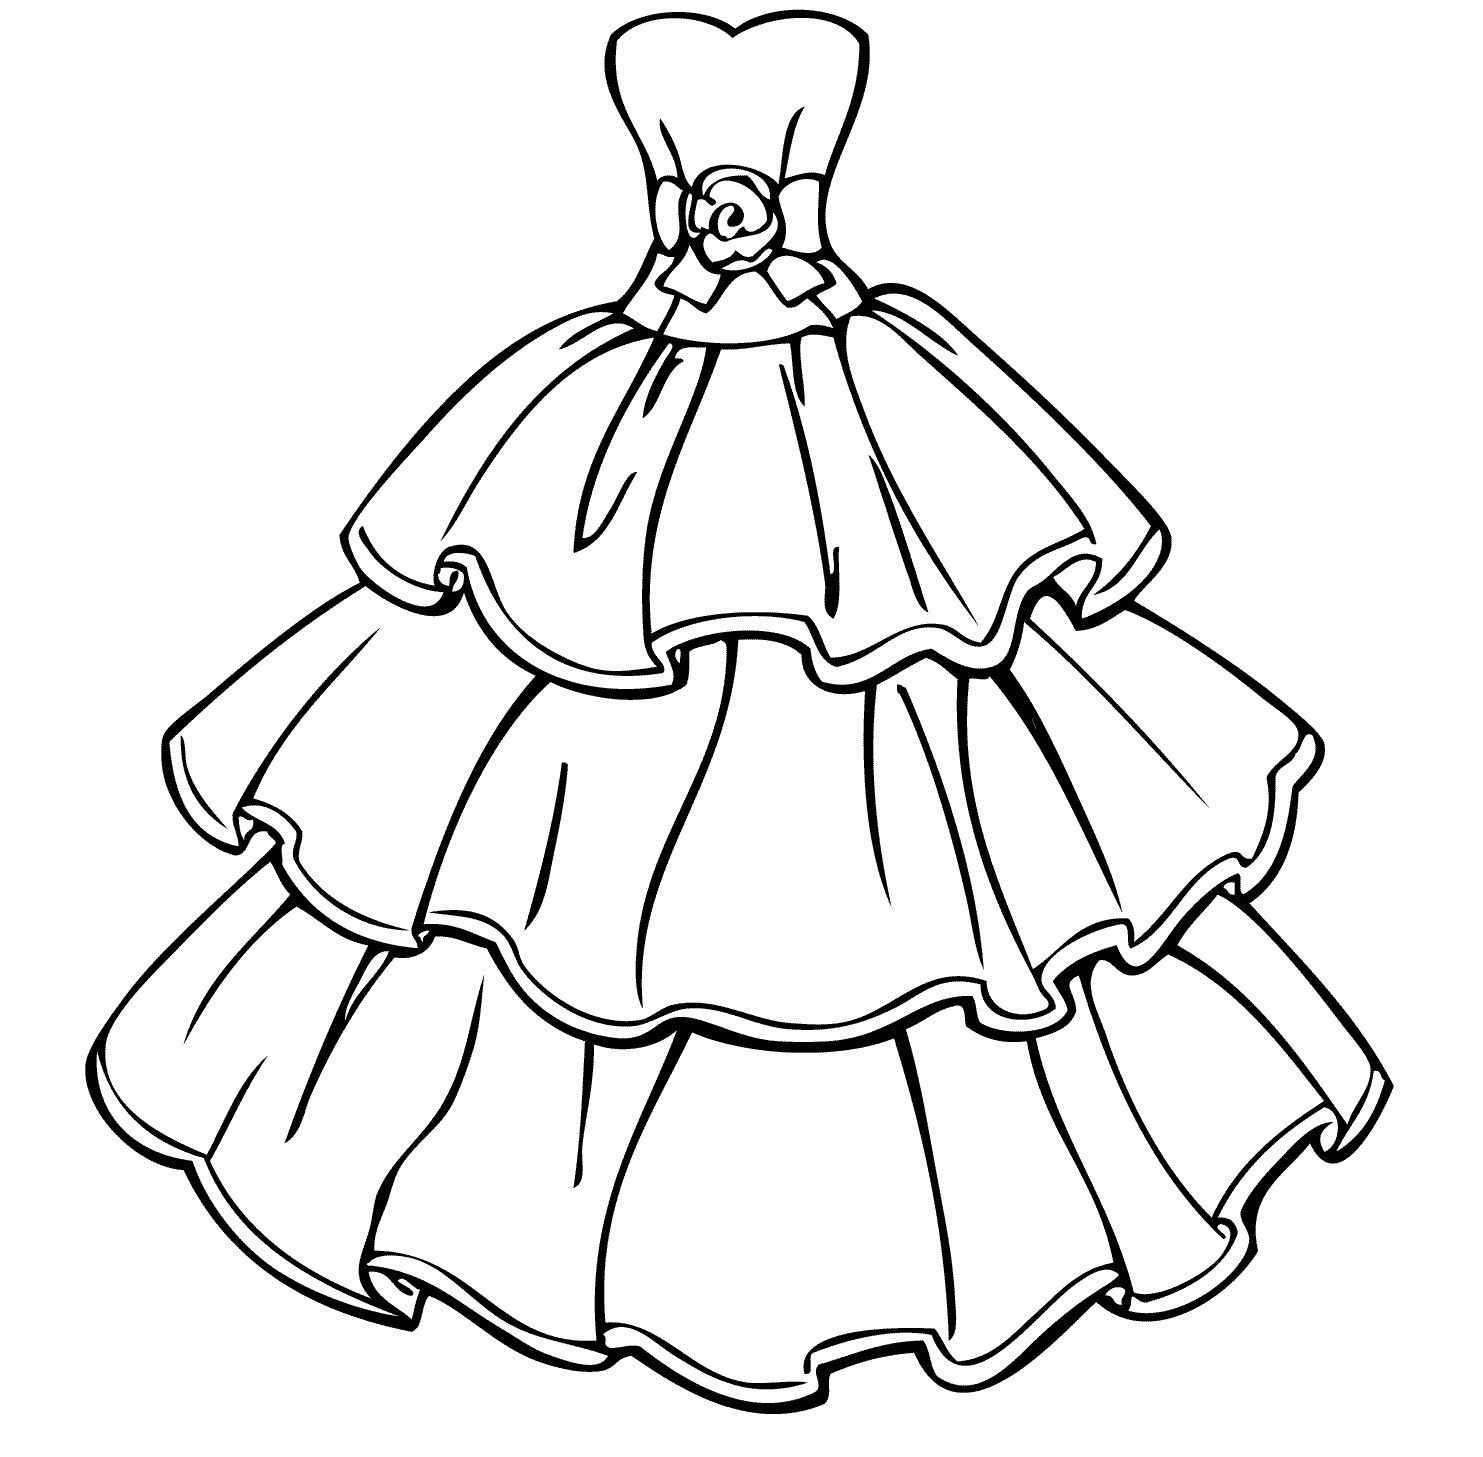 Princess Dress Coloring Pages - Coloring and Drawing